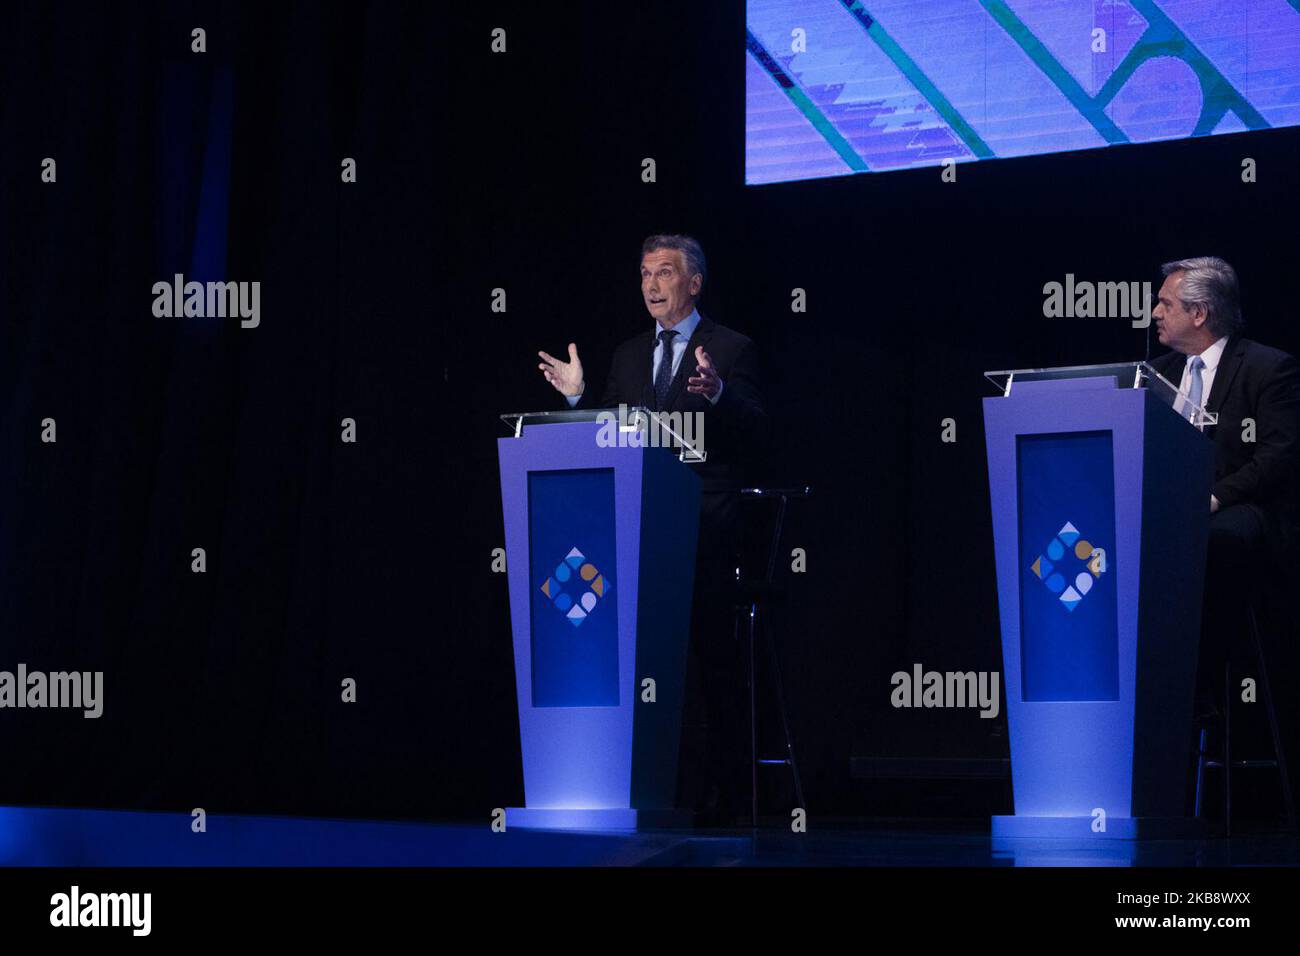 Mauricio Macri, Argentina's president, left, speaks while Alberto Fernandez, presidential candidate for Frente de Todos party, listens during a presidential candidate debate in Buenos Aires, Argentina, on Sunday, Oct. 20, 2019. (Photo by Matías Baglietto/NurPhoto) Stock Photo